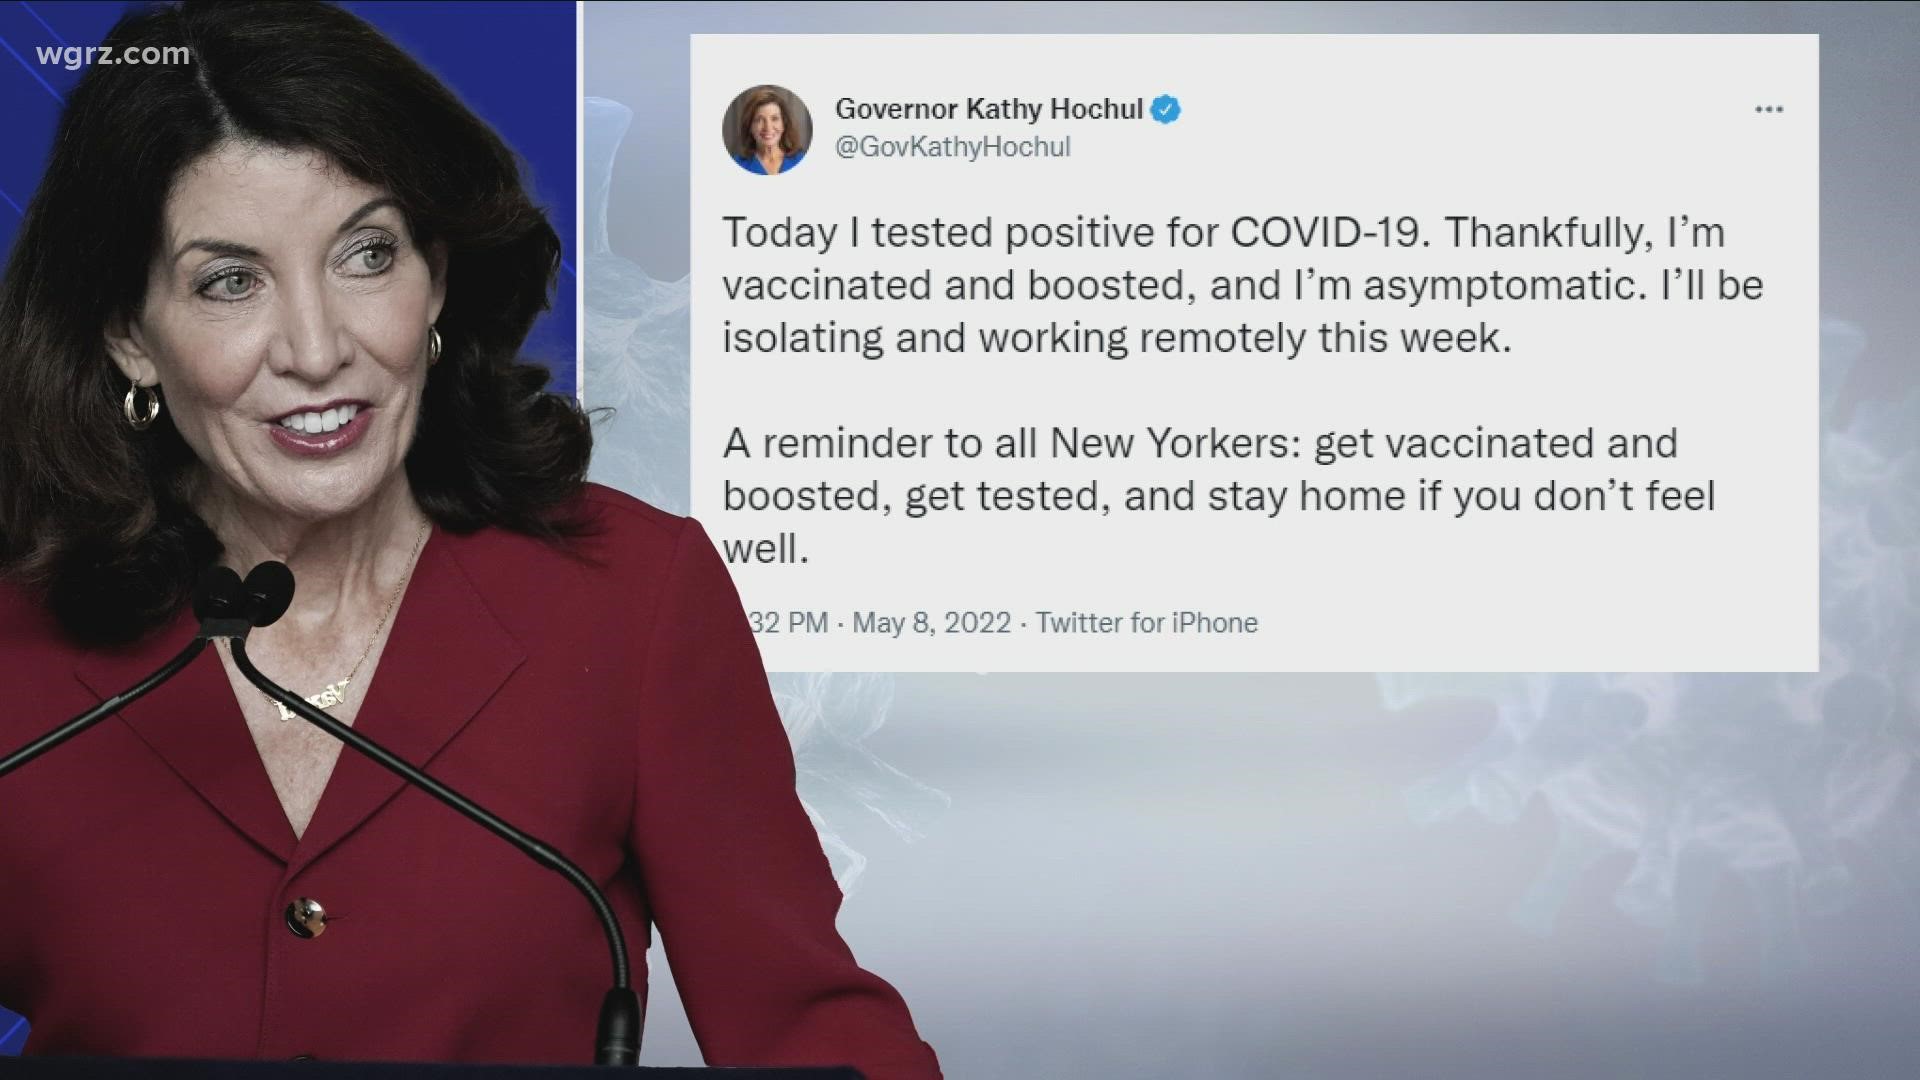 Governor Hochul made the announcement Sunday afternoon on her social media pages that she has tested positive for COVID.